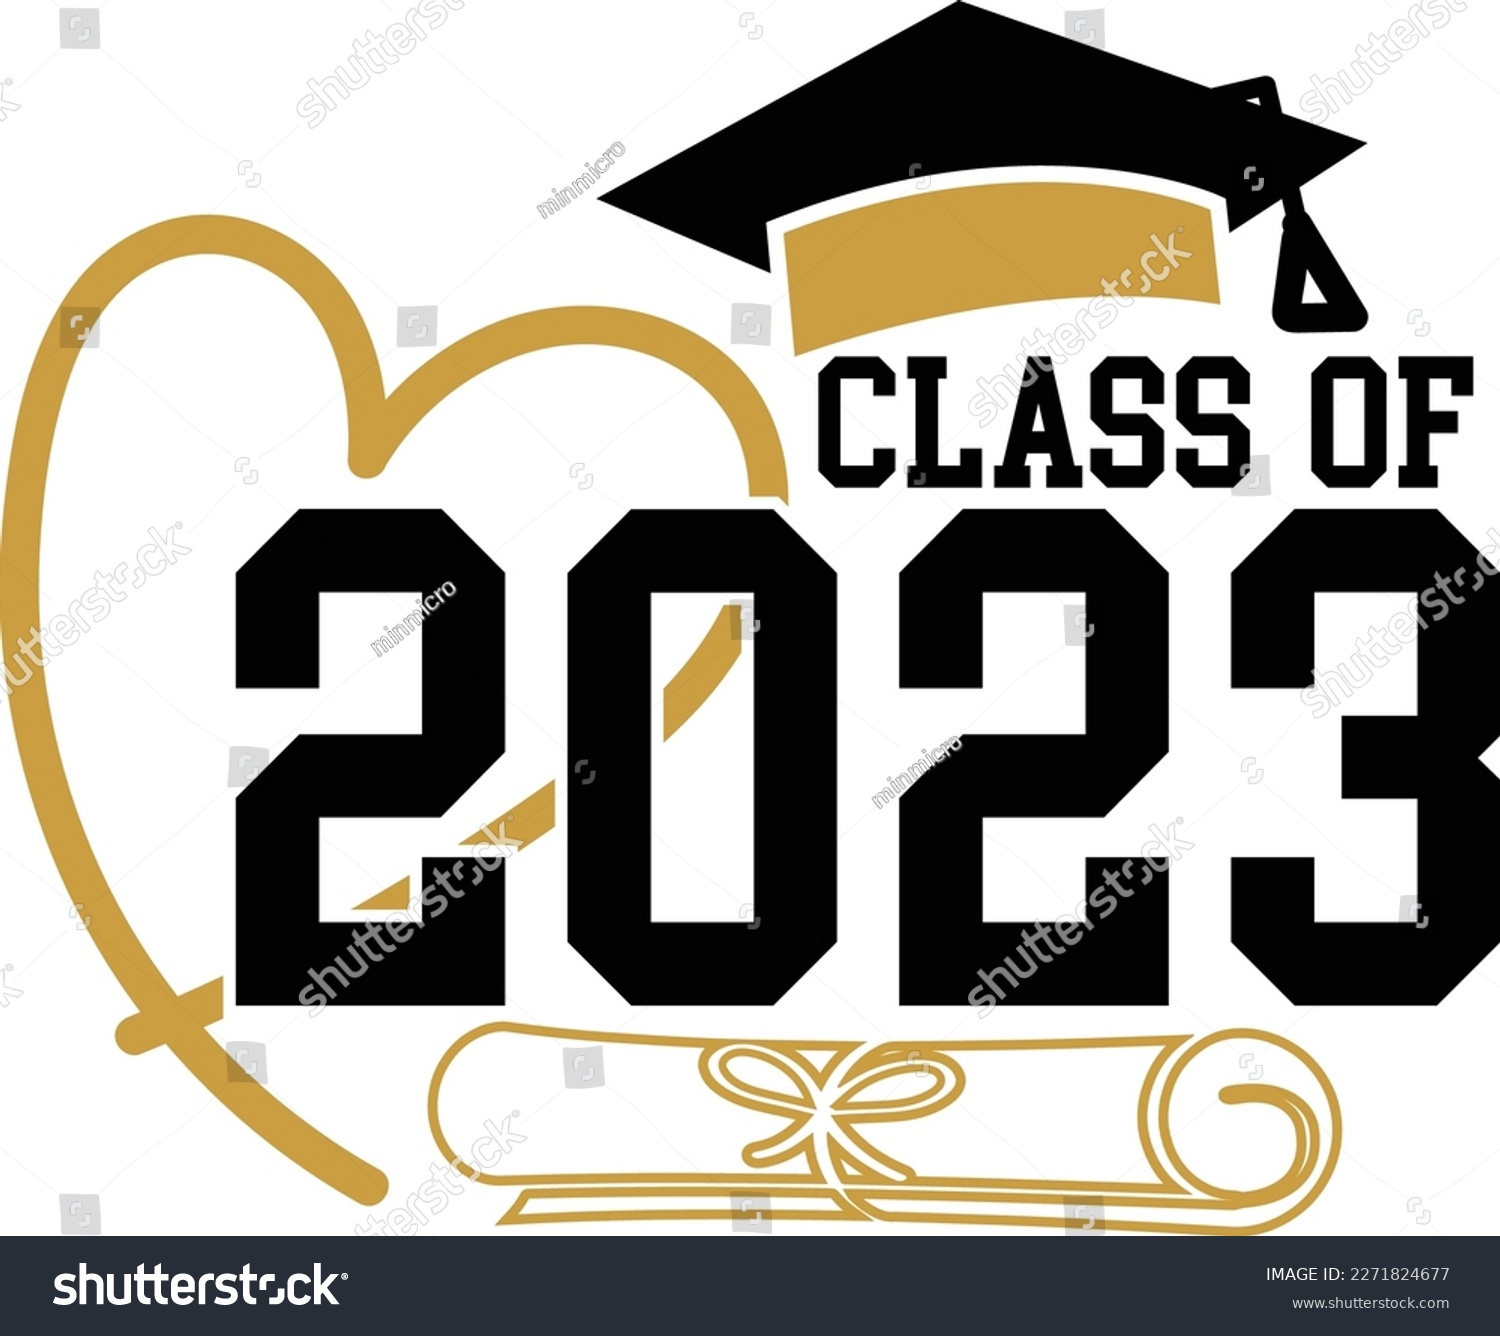 Class Of 2023 With Graduation Cap Svg Template Royalty Free Stock Vector 2271824677 2063